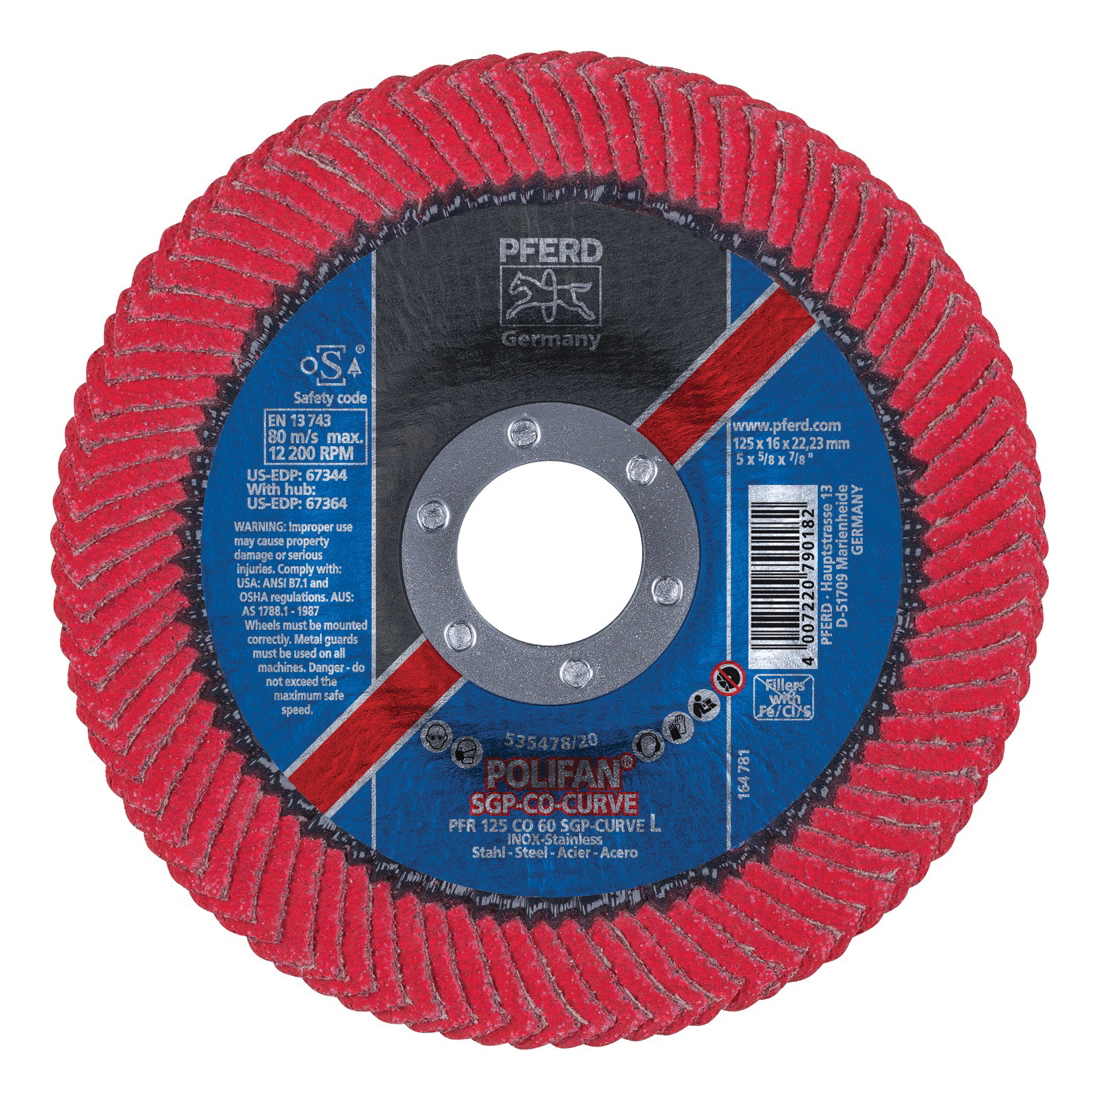 PFERD Polifan® 67344 Special Line SGP CO-CURVE Unthreaded Coated Abrasive Flap Disc, 5 in Dia, 7/8 in Center Hole, 60 Grit, Ceramic Oxide Abrasive, Type PFR/Radial Disc